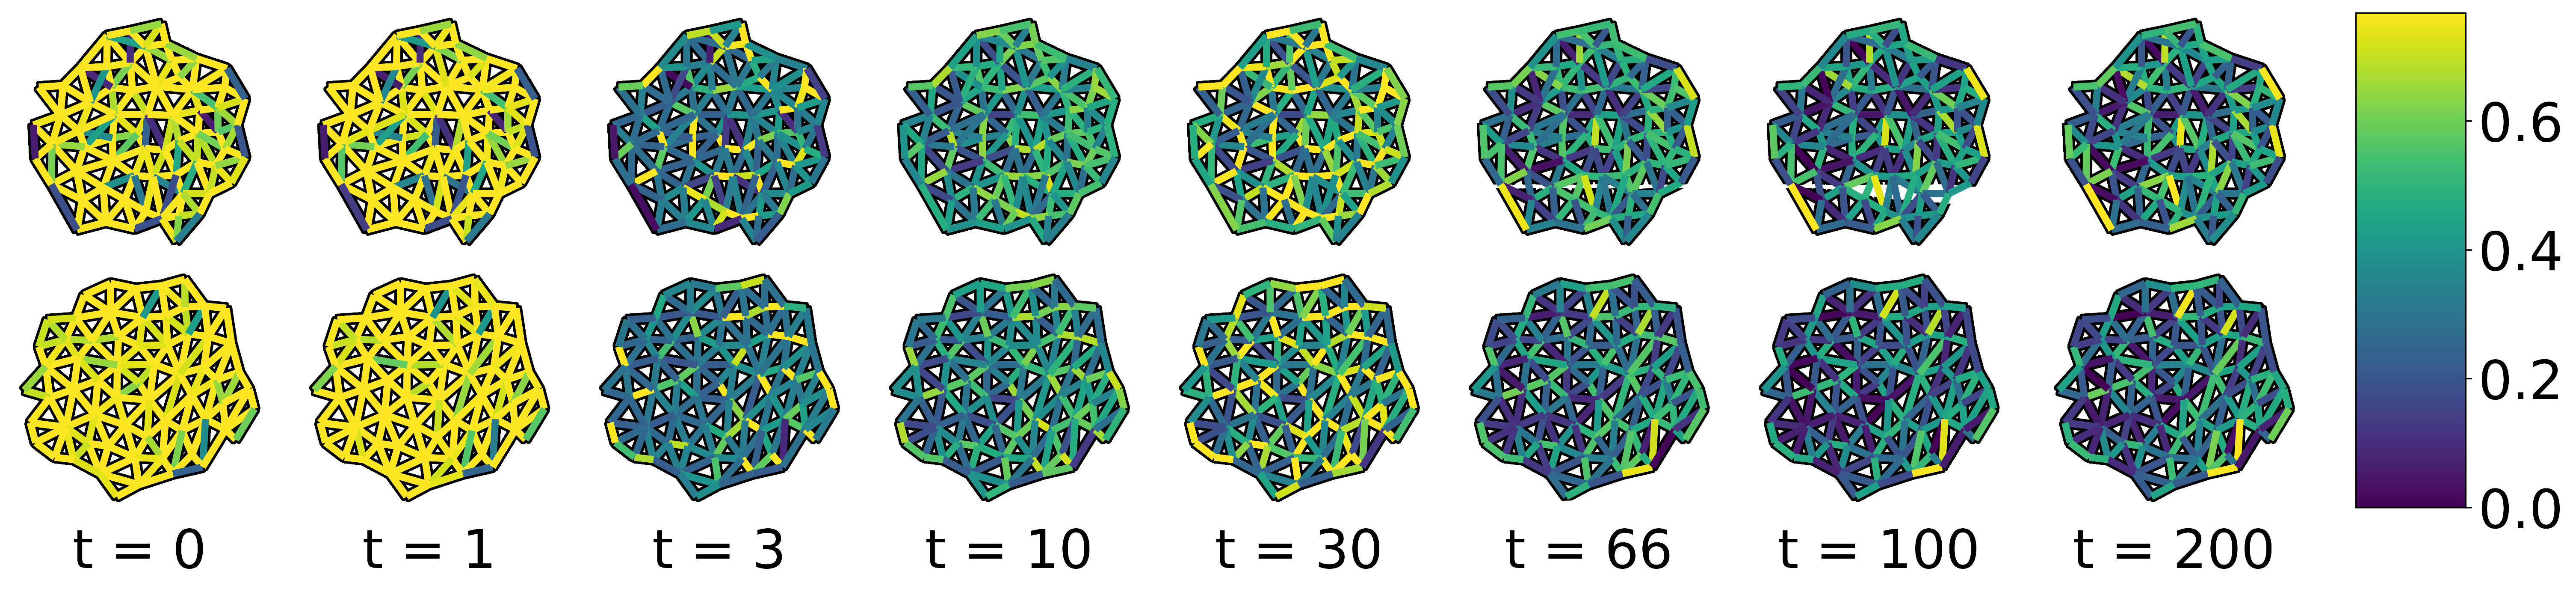 A neural network model learns edge weights which distinguish two classes of graphs. Each row shows the weight values assigned by the network at different times during the training process, from pre-training (far left) to convergence (right). The top row represents a patch of wild-type Arabidopsis cells, and the bottom row represents mutants. The pictured edge weights cause these two categories of graph to have distinct spectra.